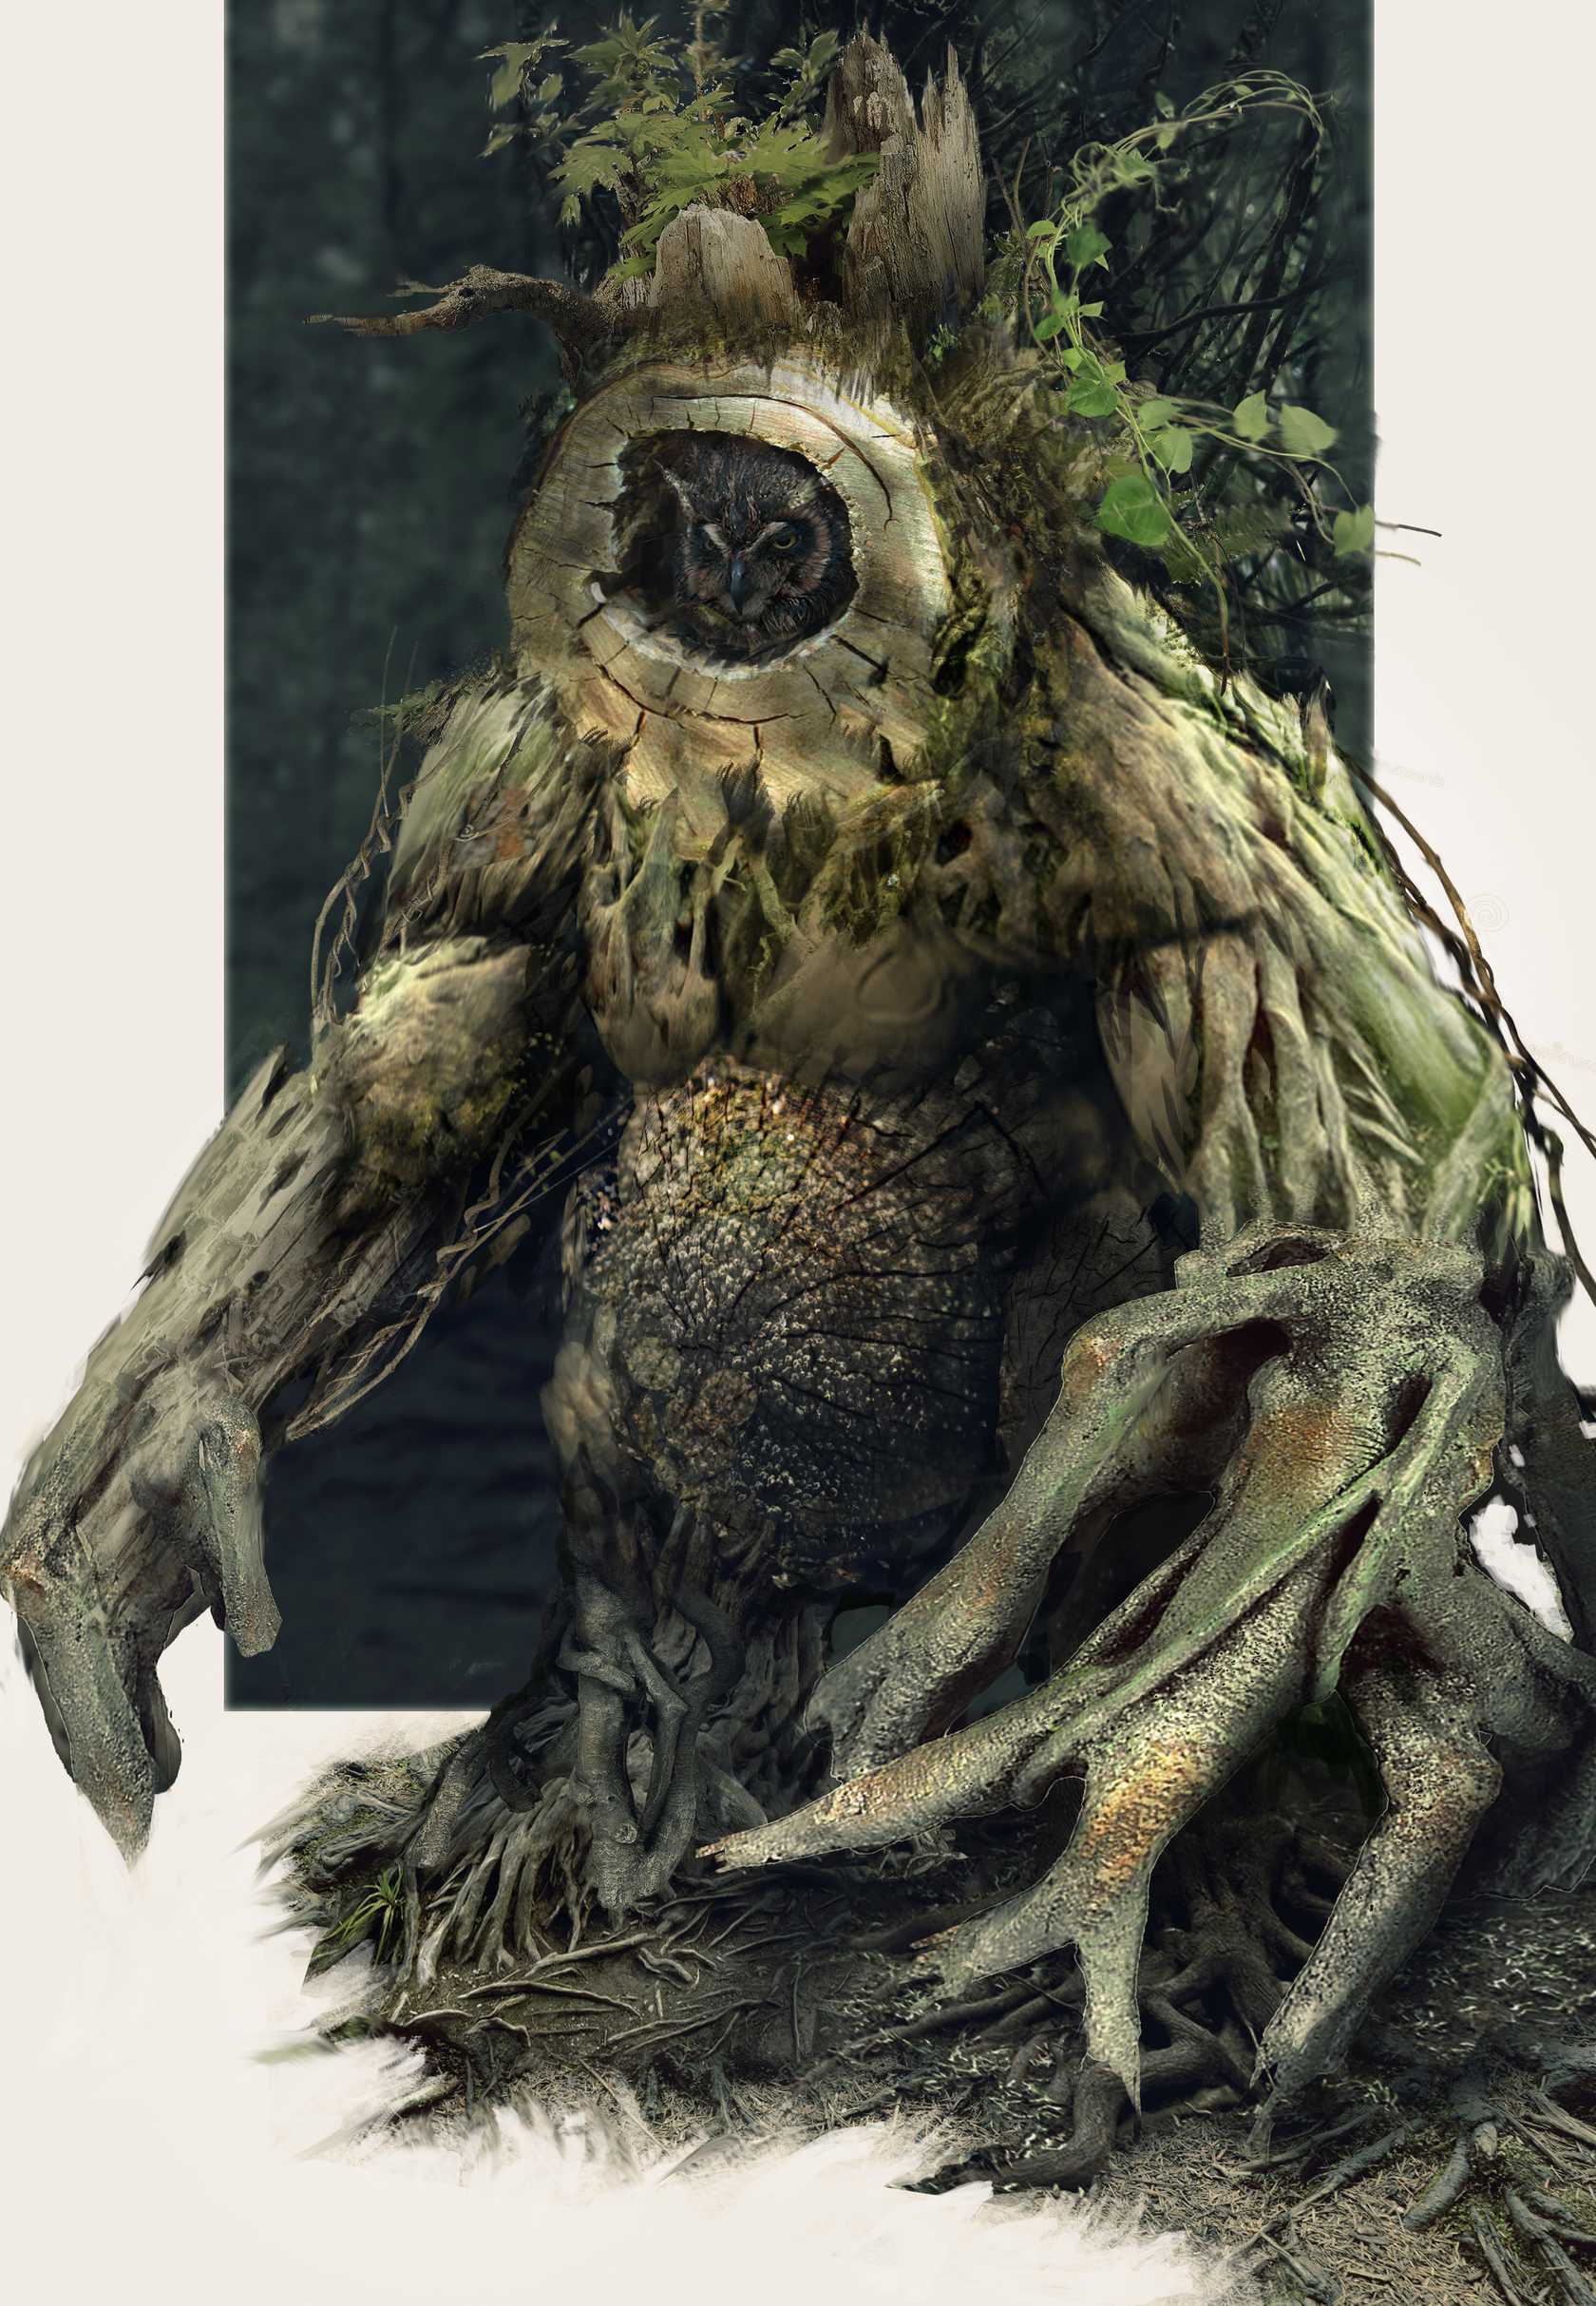 An overgrown tree creature with root-like arms, and an owl in the tree hollow at its head.